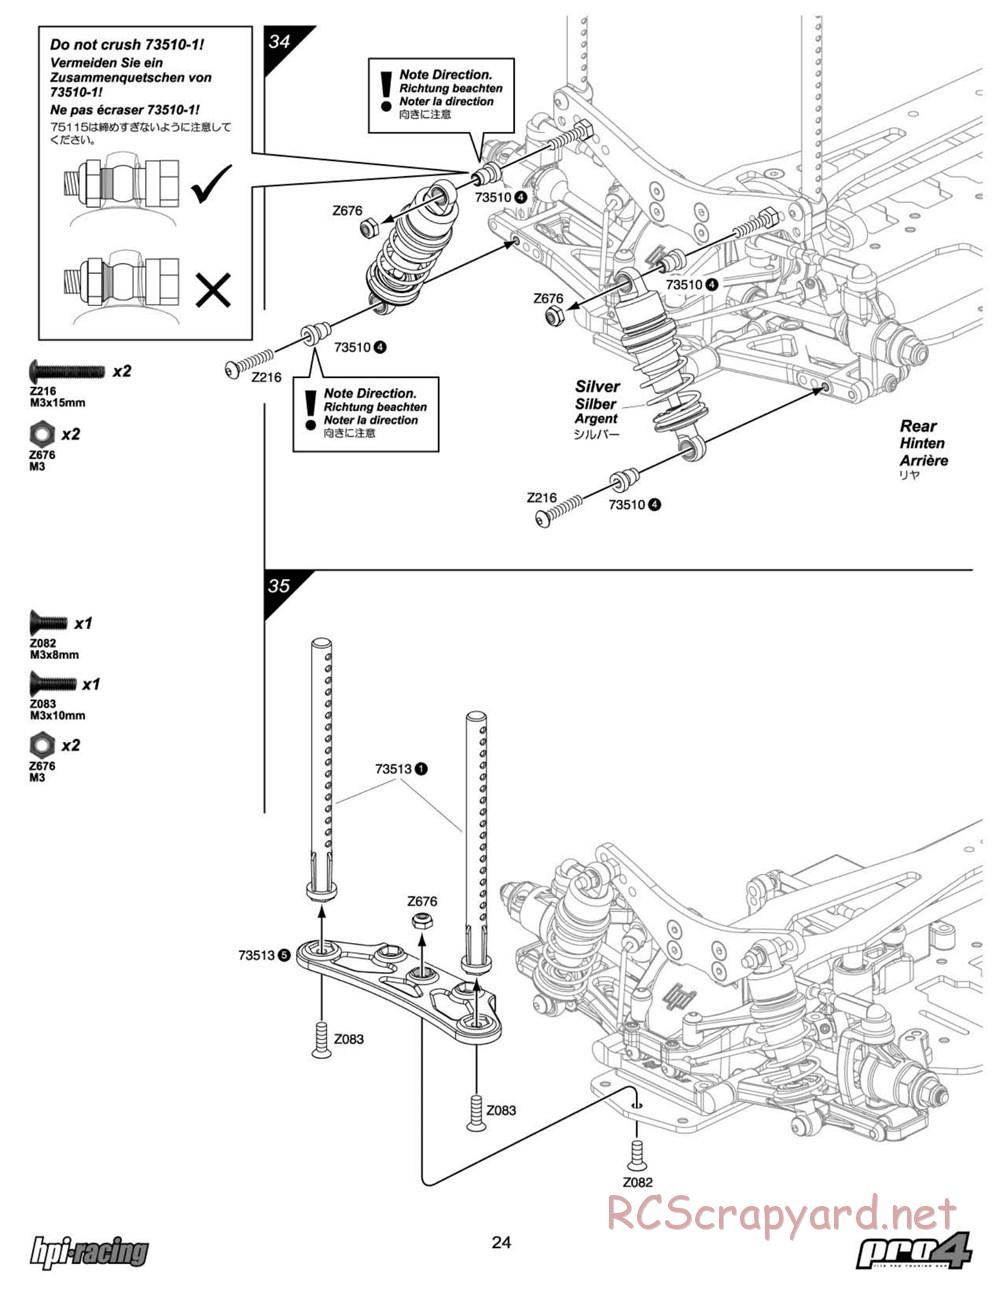 HPI - RS4 Pro4 - Manual - Page 24